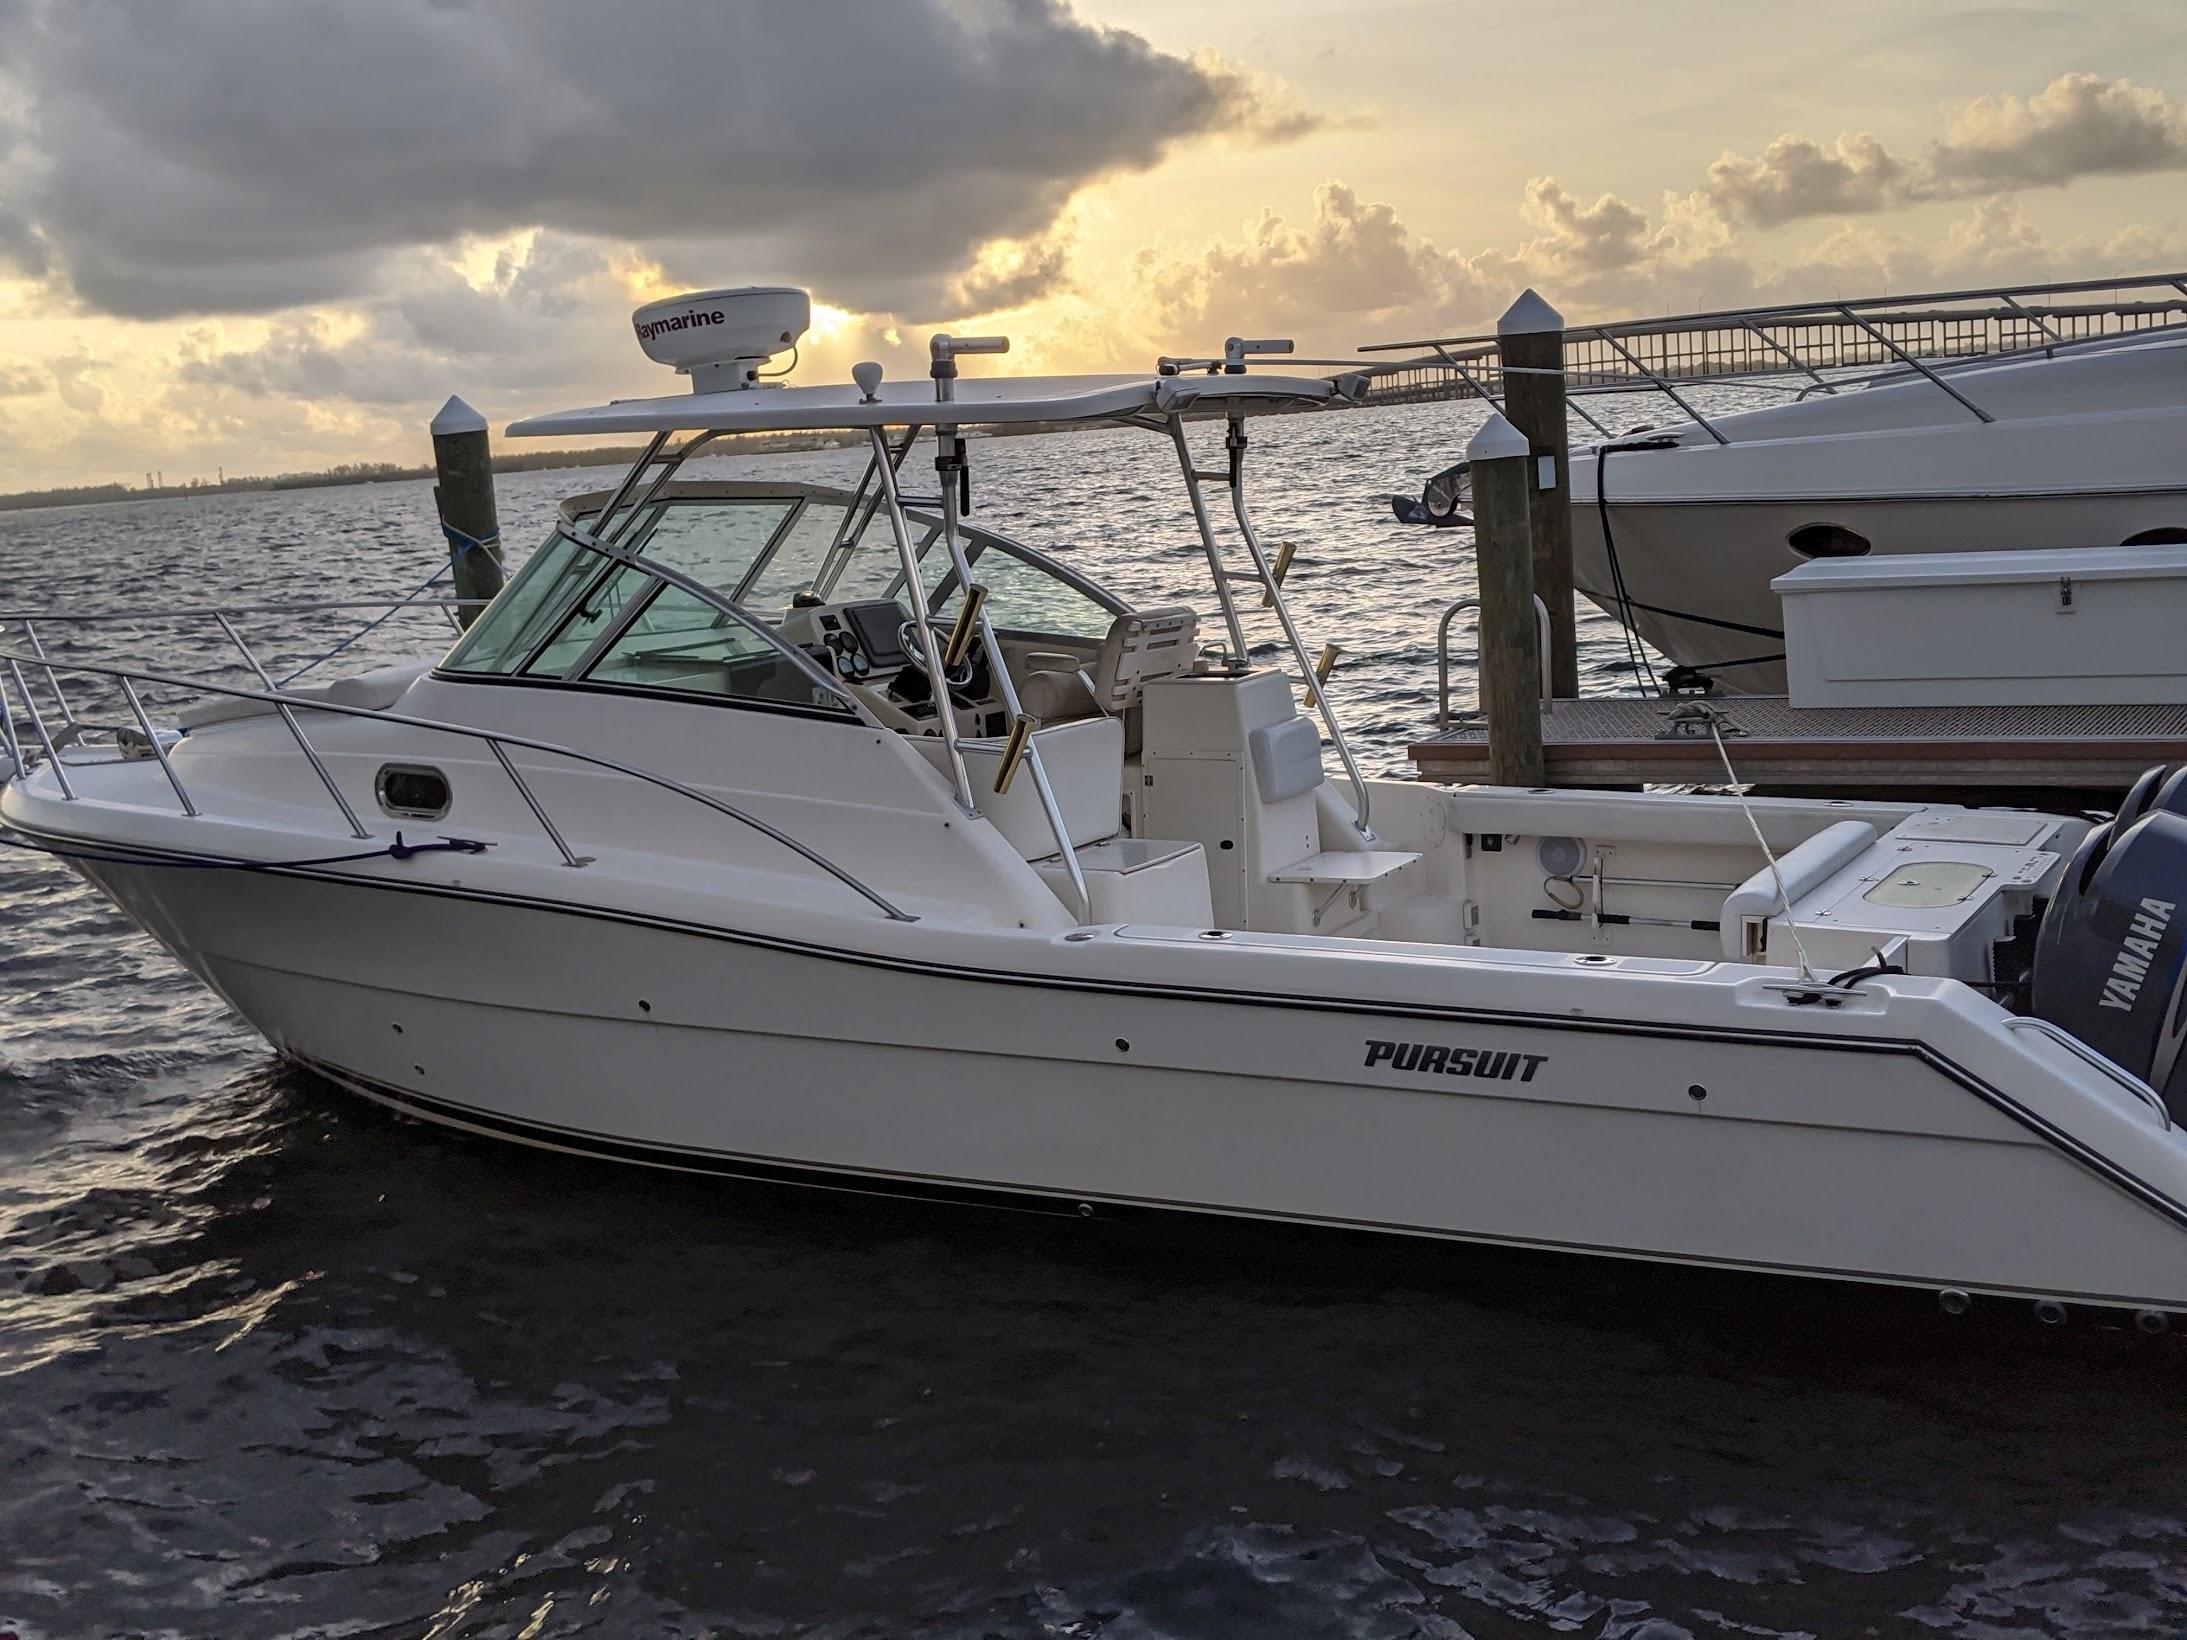 2006 Pursuit 3070 Offshore Saltwater Fishing for sale - YachtWorld